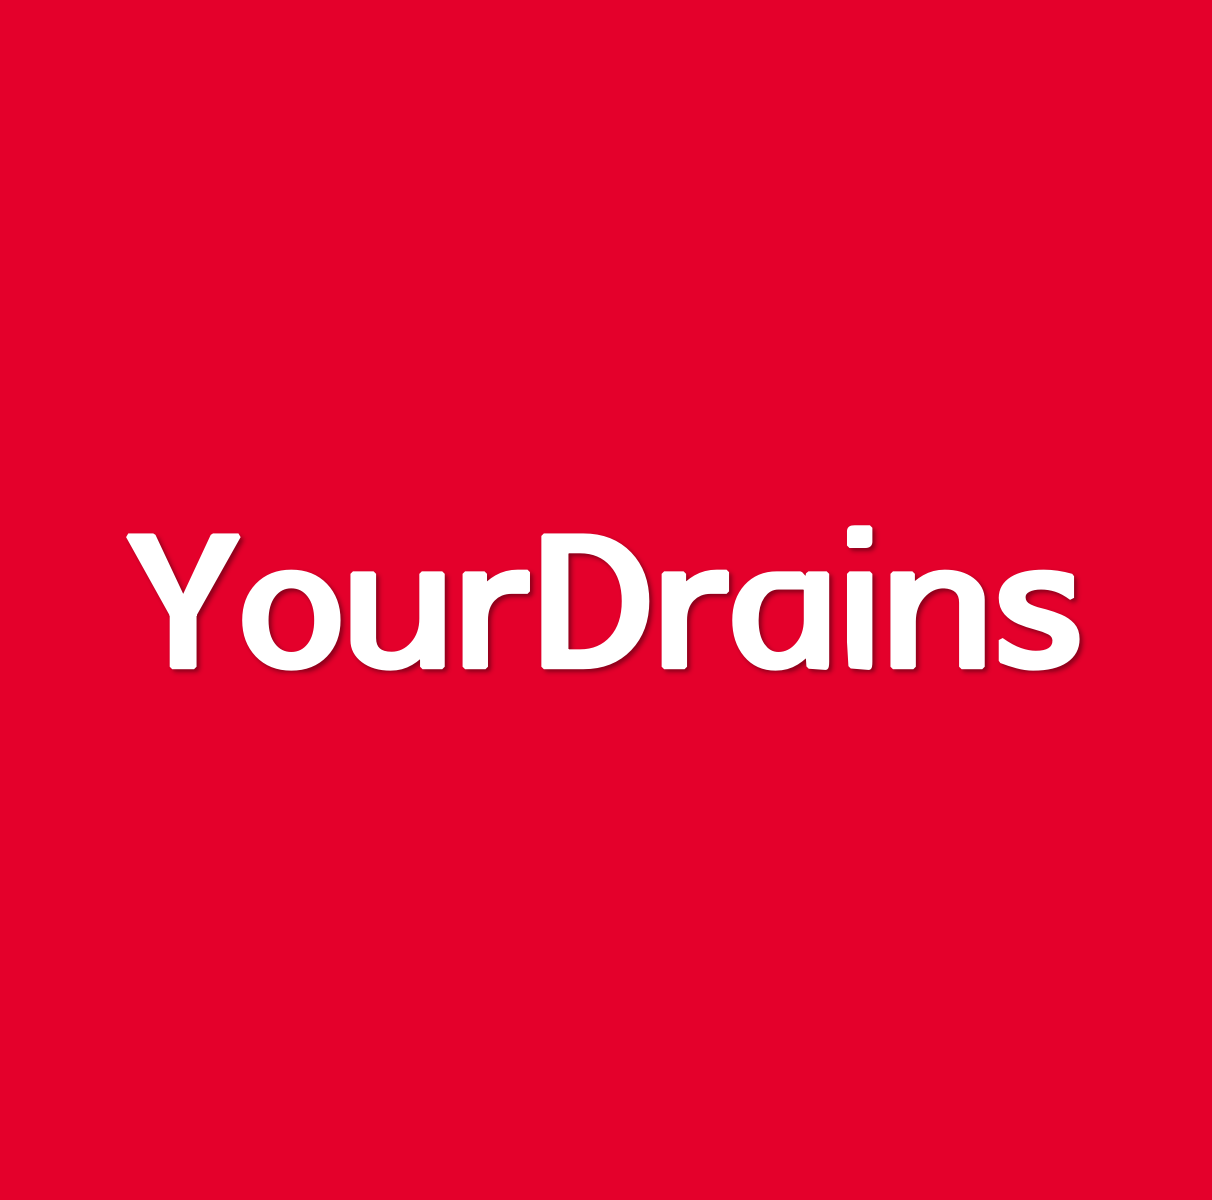 Your Drains (YourDrains.co.uk)